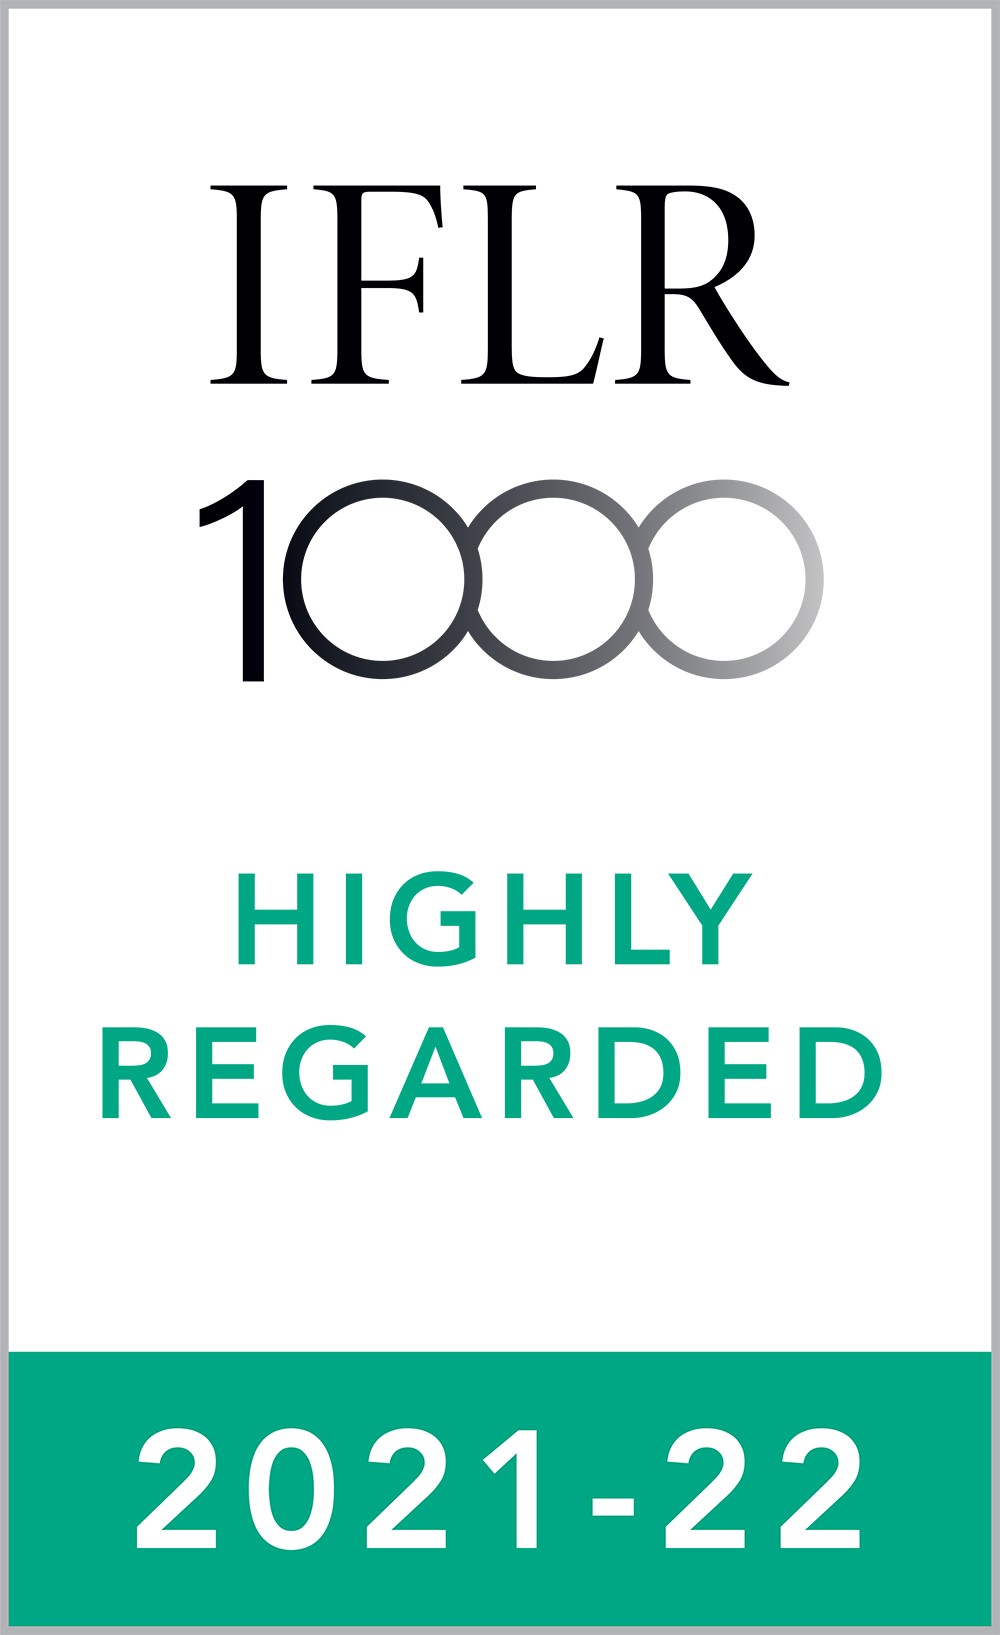 LC Lawyers recognised by IFLR1000 2021/22 edition | LC Lawyers